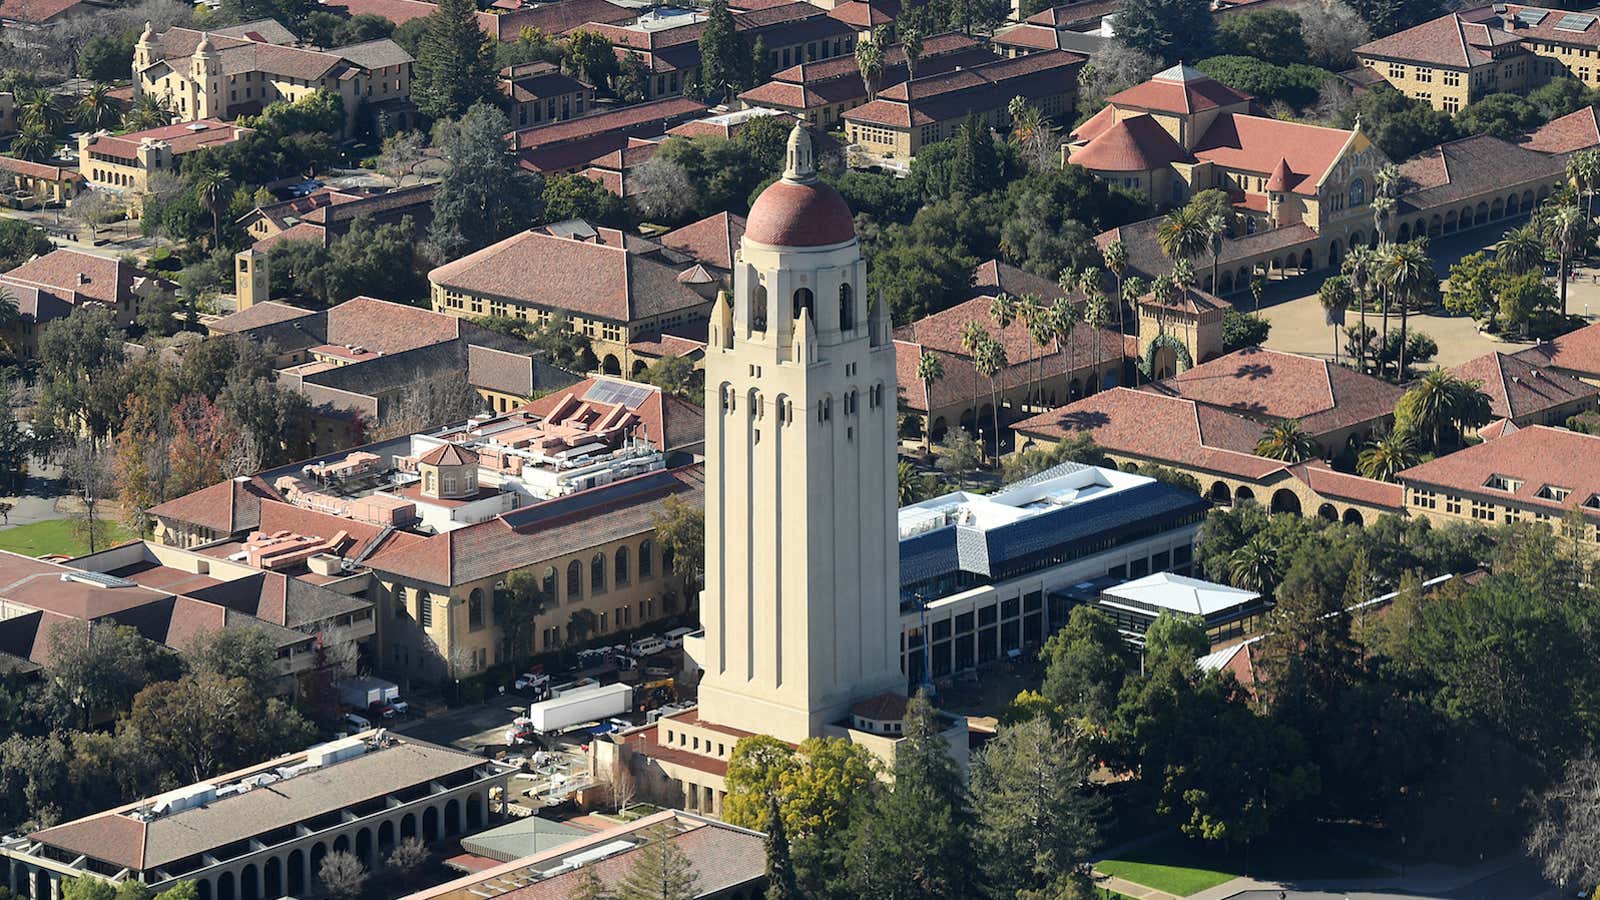 The Hoover Tower rises above Stanford University in this aerial photo in Stanford, California, U.S. on January 13, 2017.